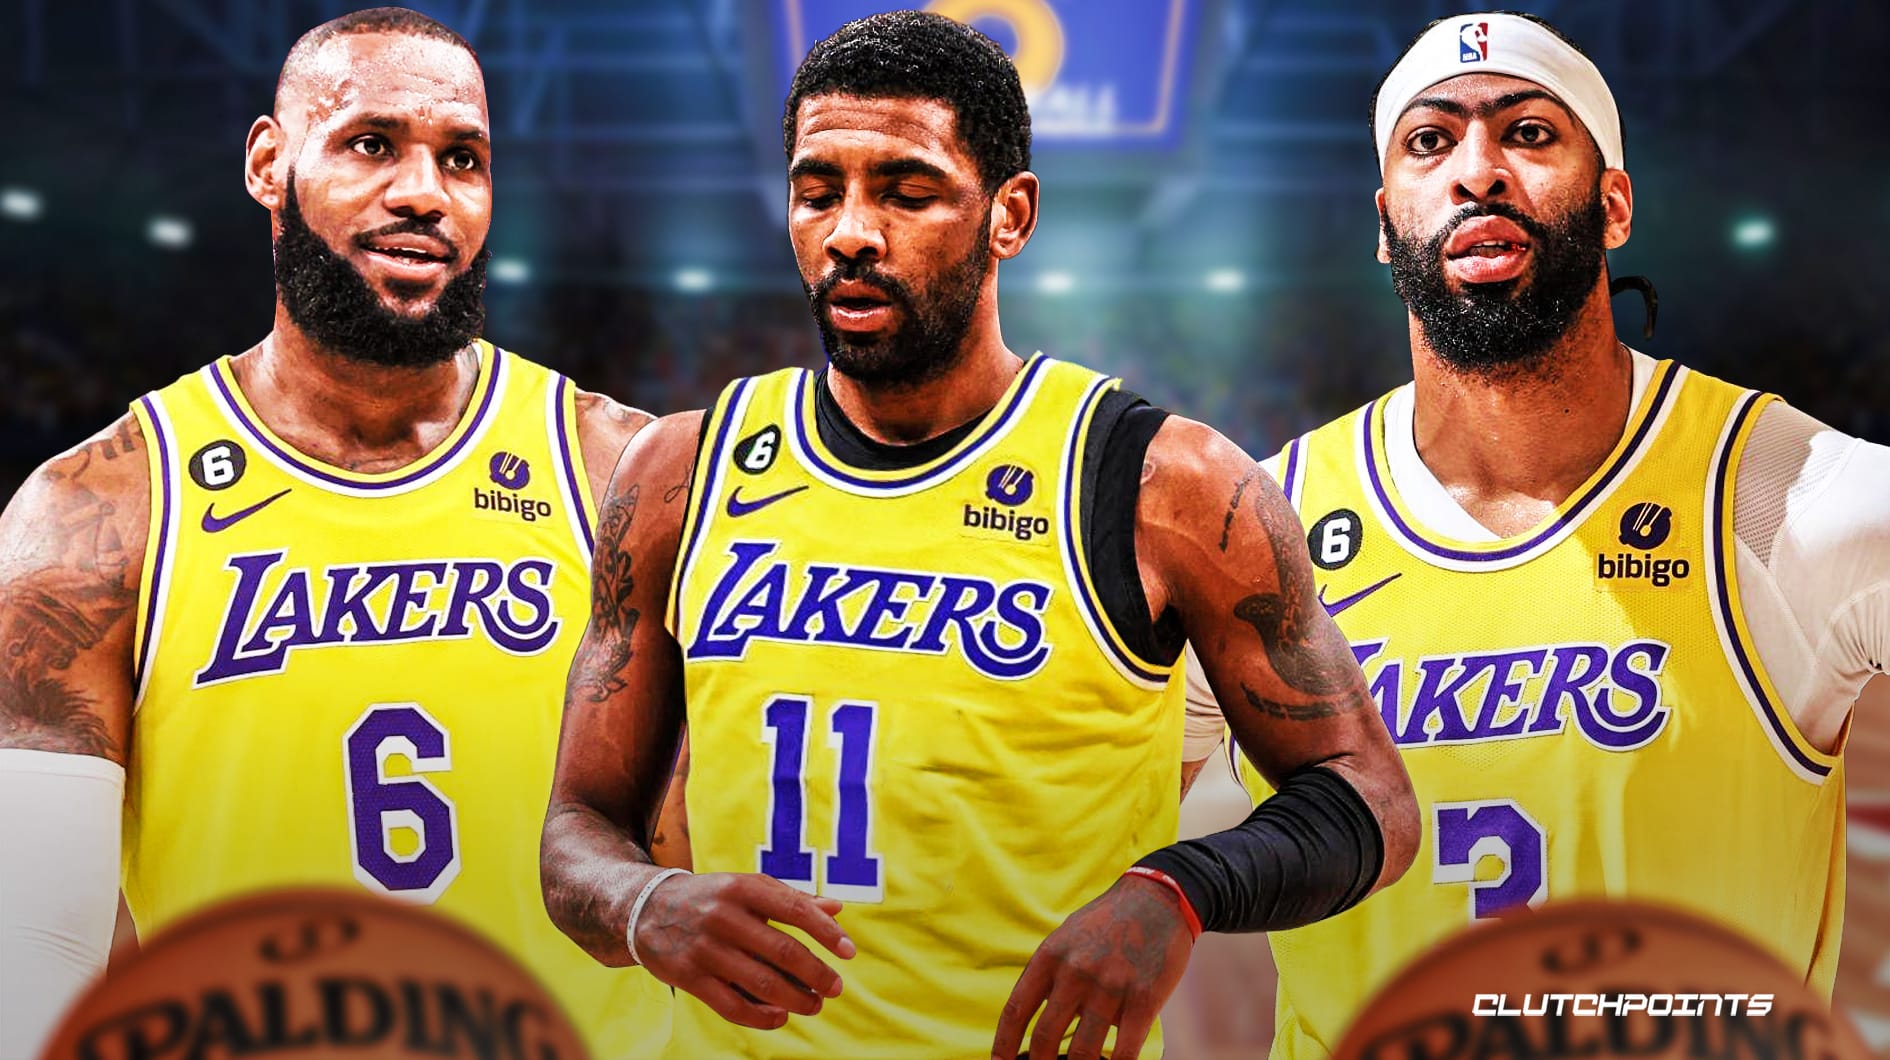 Lakers: LeBron James, Kyrie Irving reunion still a possibility